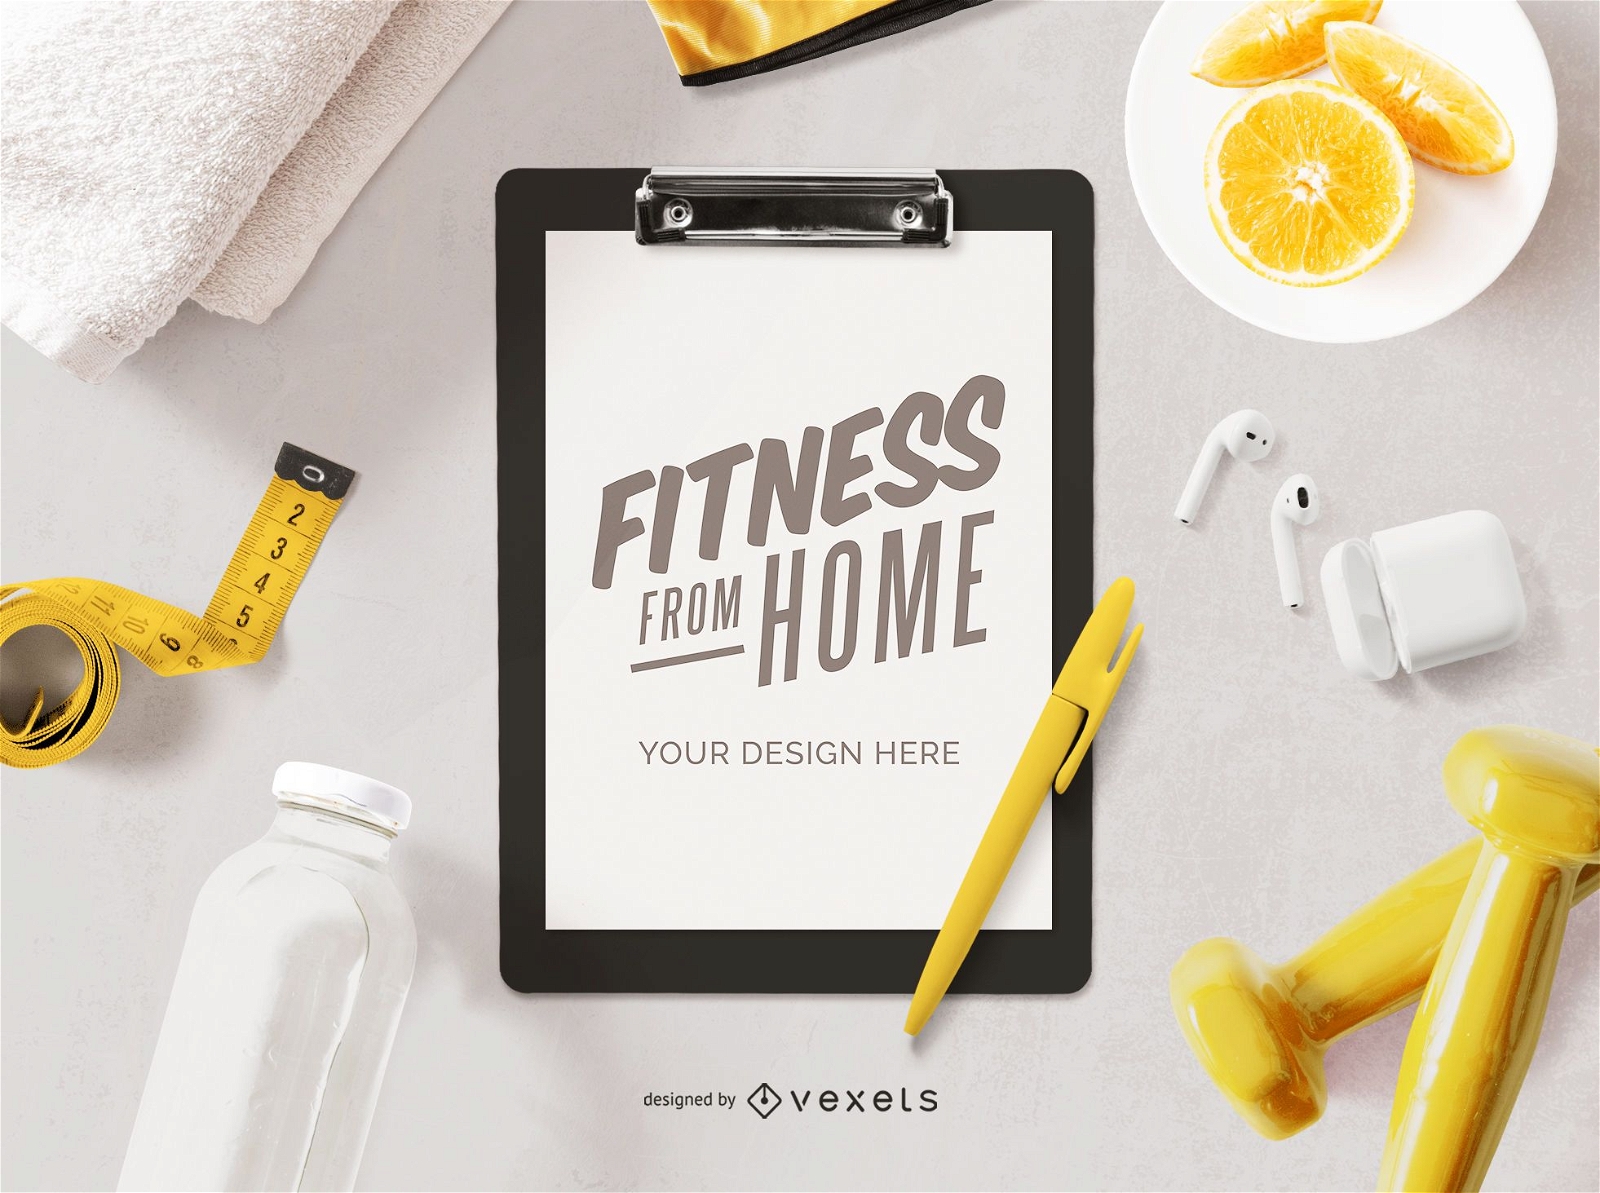 Fitness from home clipboard mockup